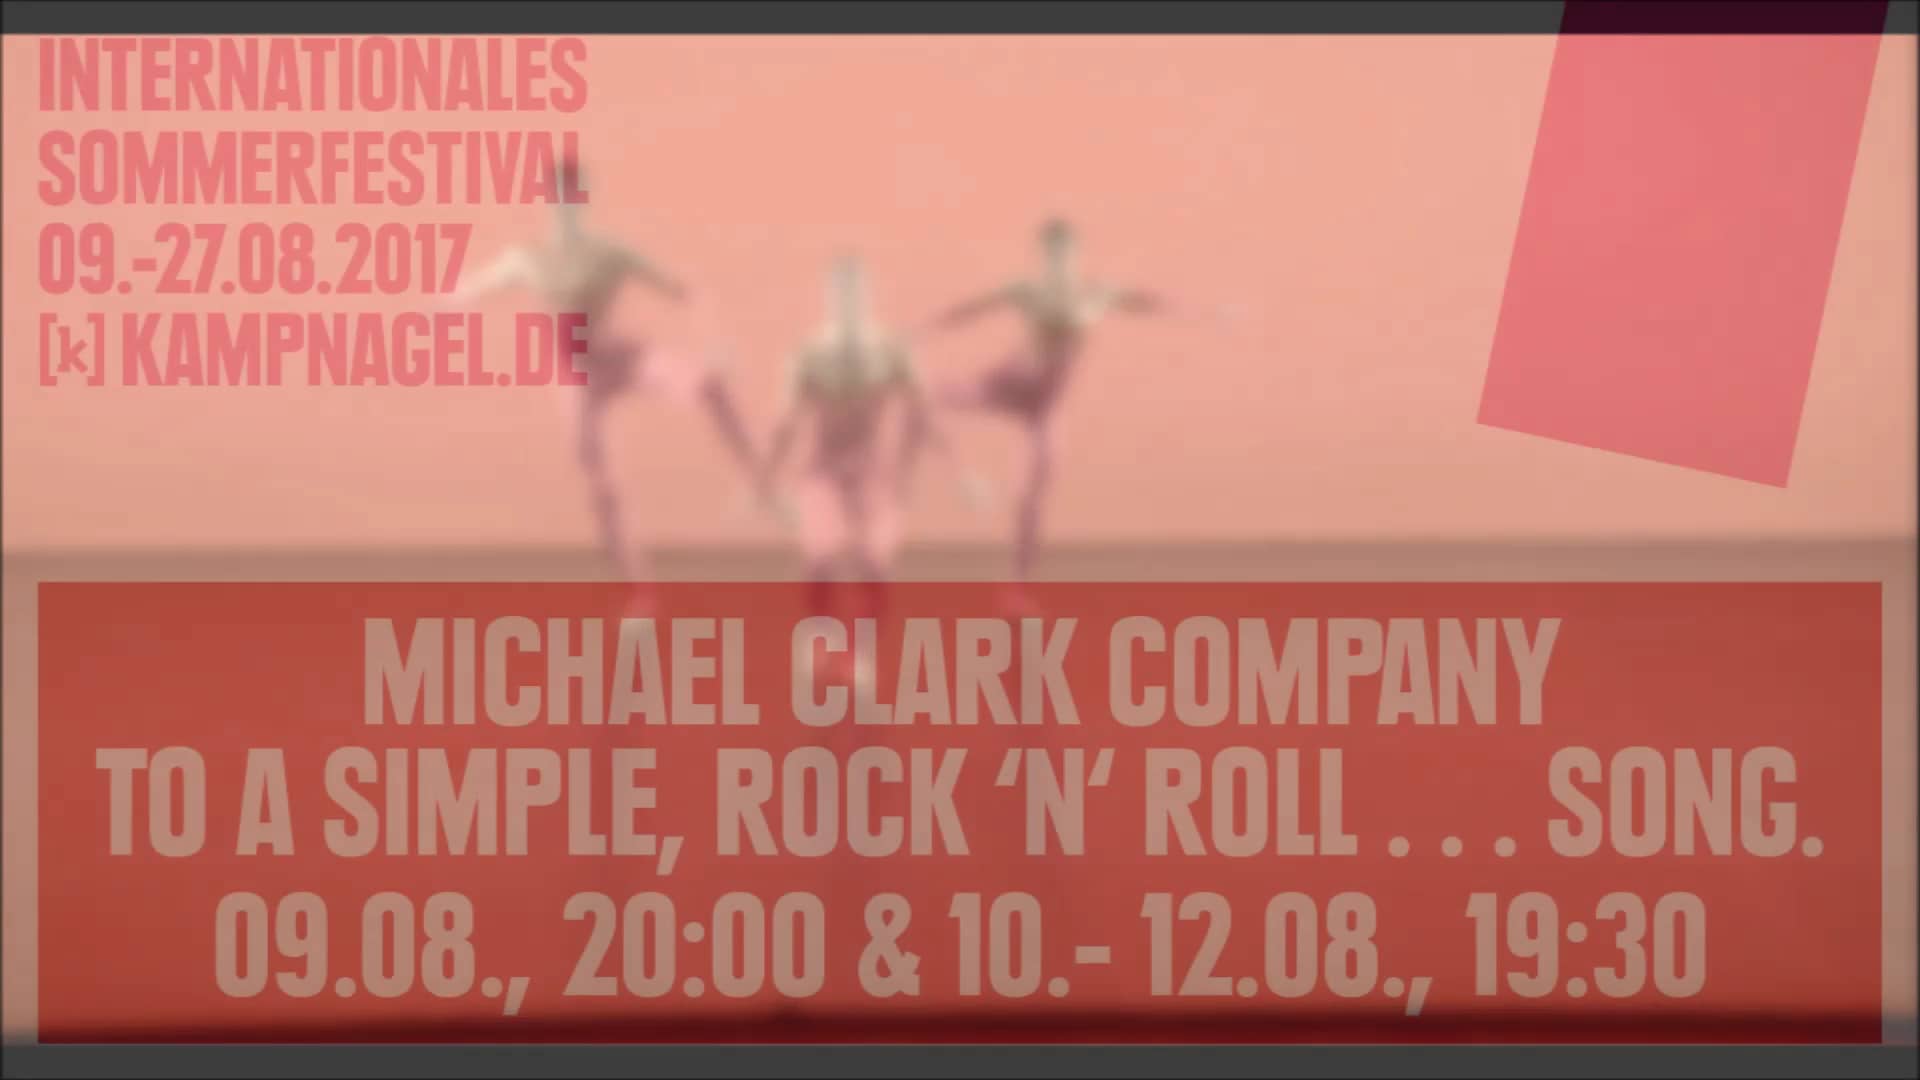 Michael Clark Company: to a simple, rock 'n' roll . . . song. on Vimeo